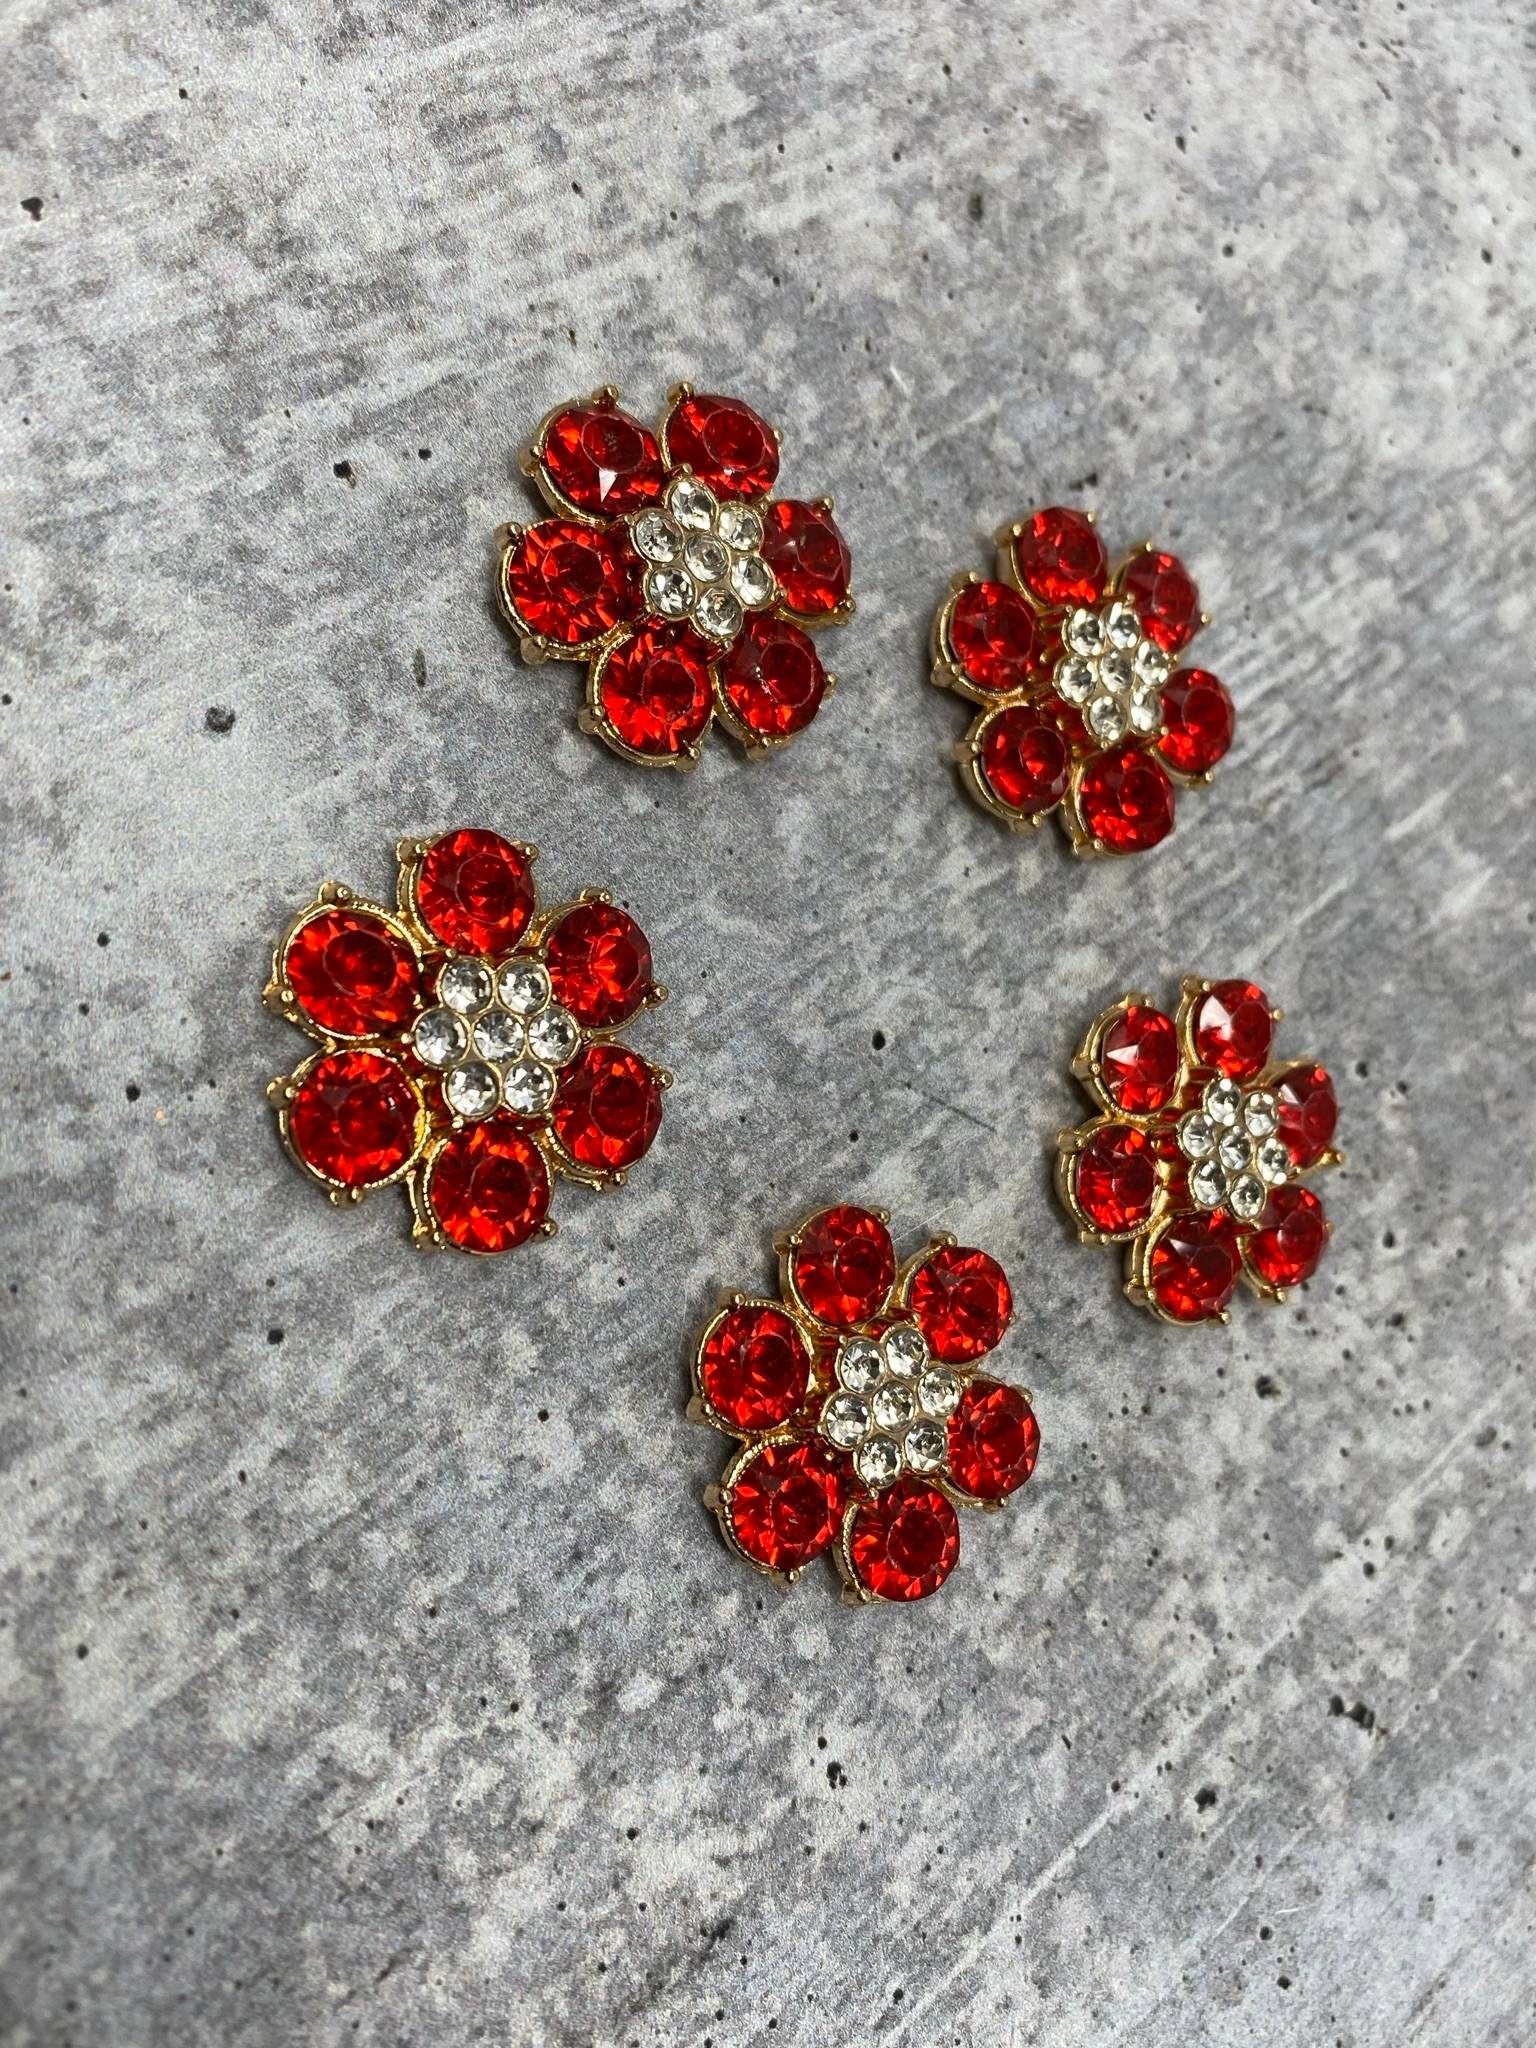 Exclusive FLATBACK, Red "Blinging Flower" Charm for Crocs; Symbolic Statement Charms for Clogs; Cute for Shoes & Cellphone Cases, 1-pc